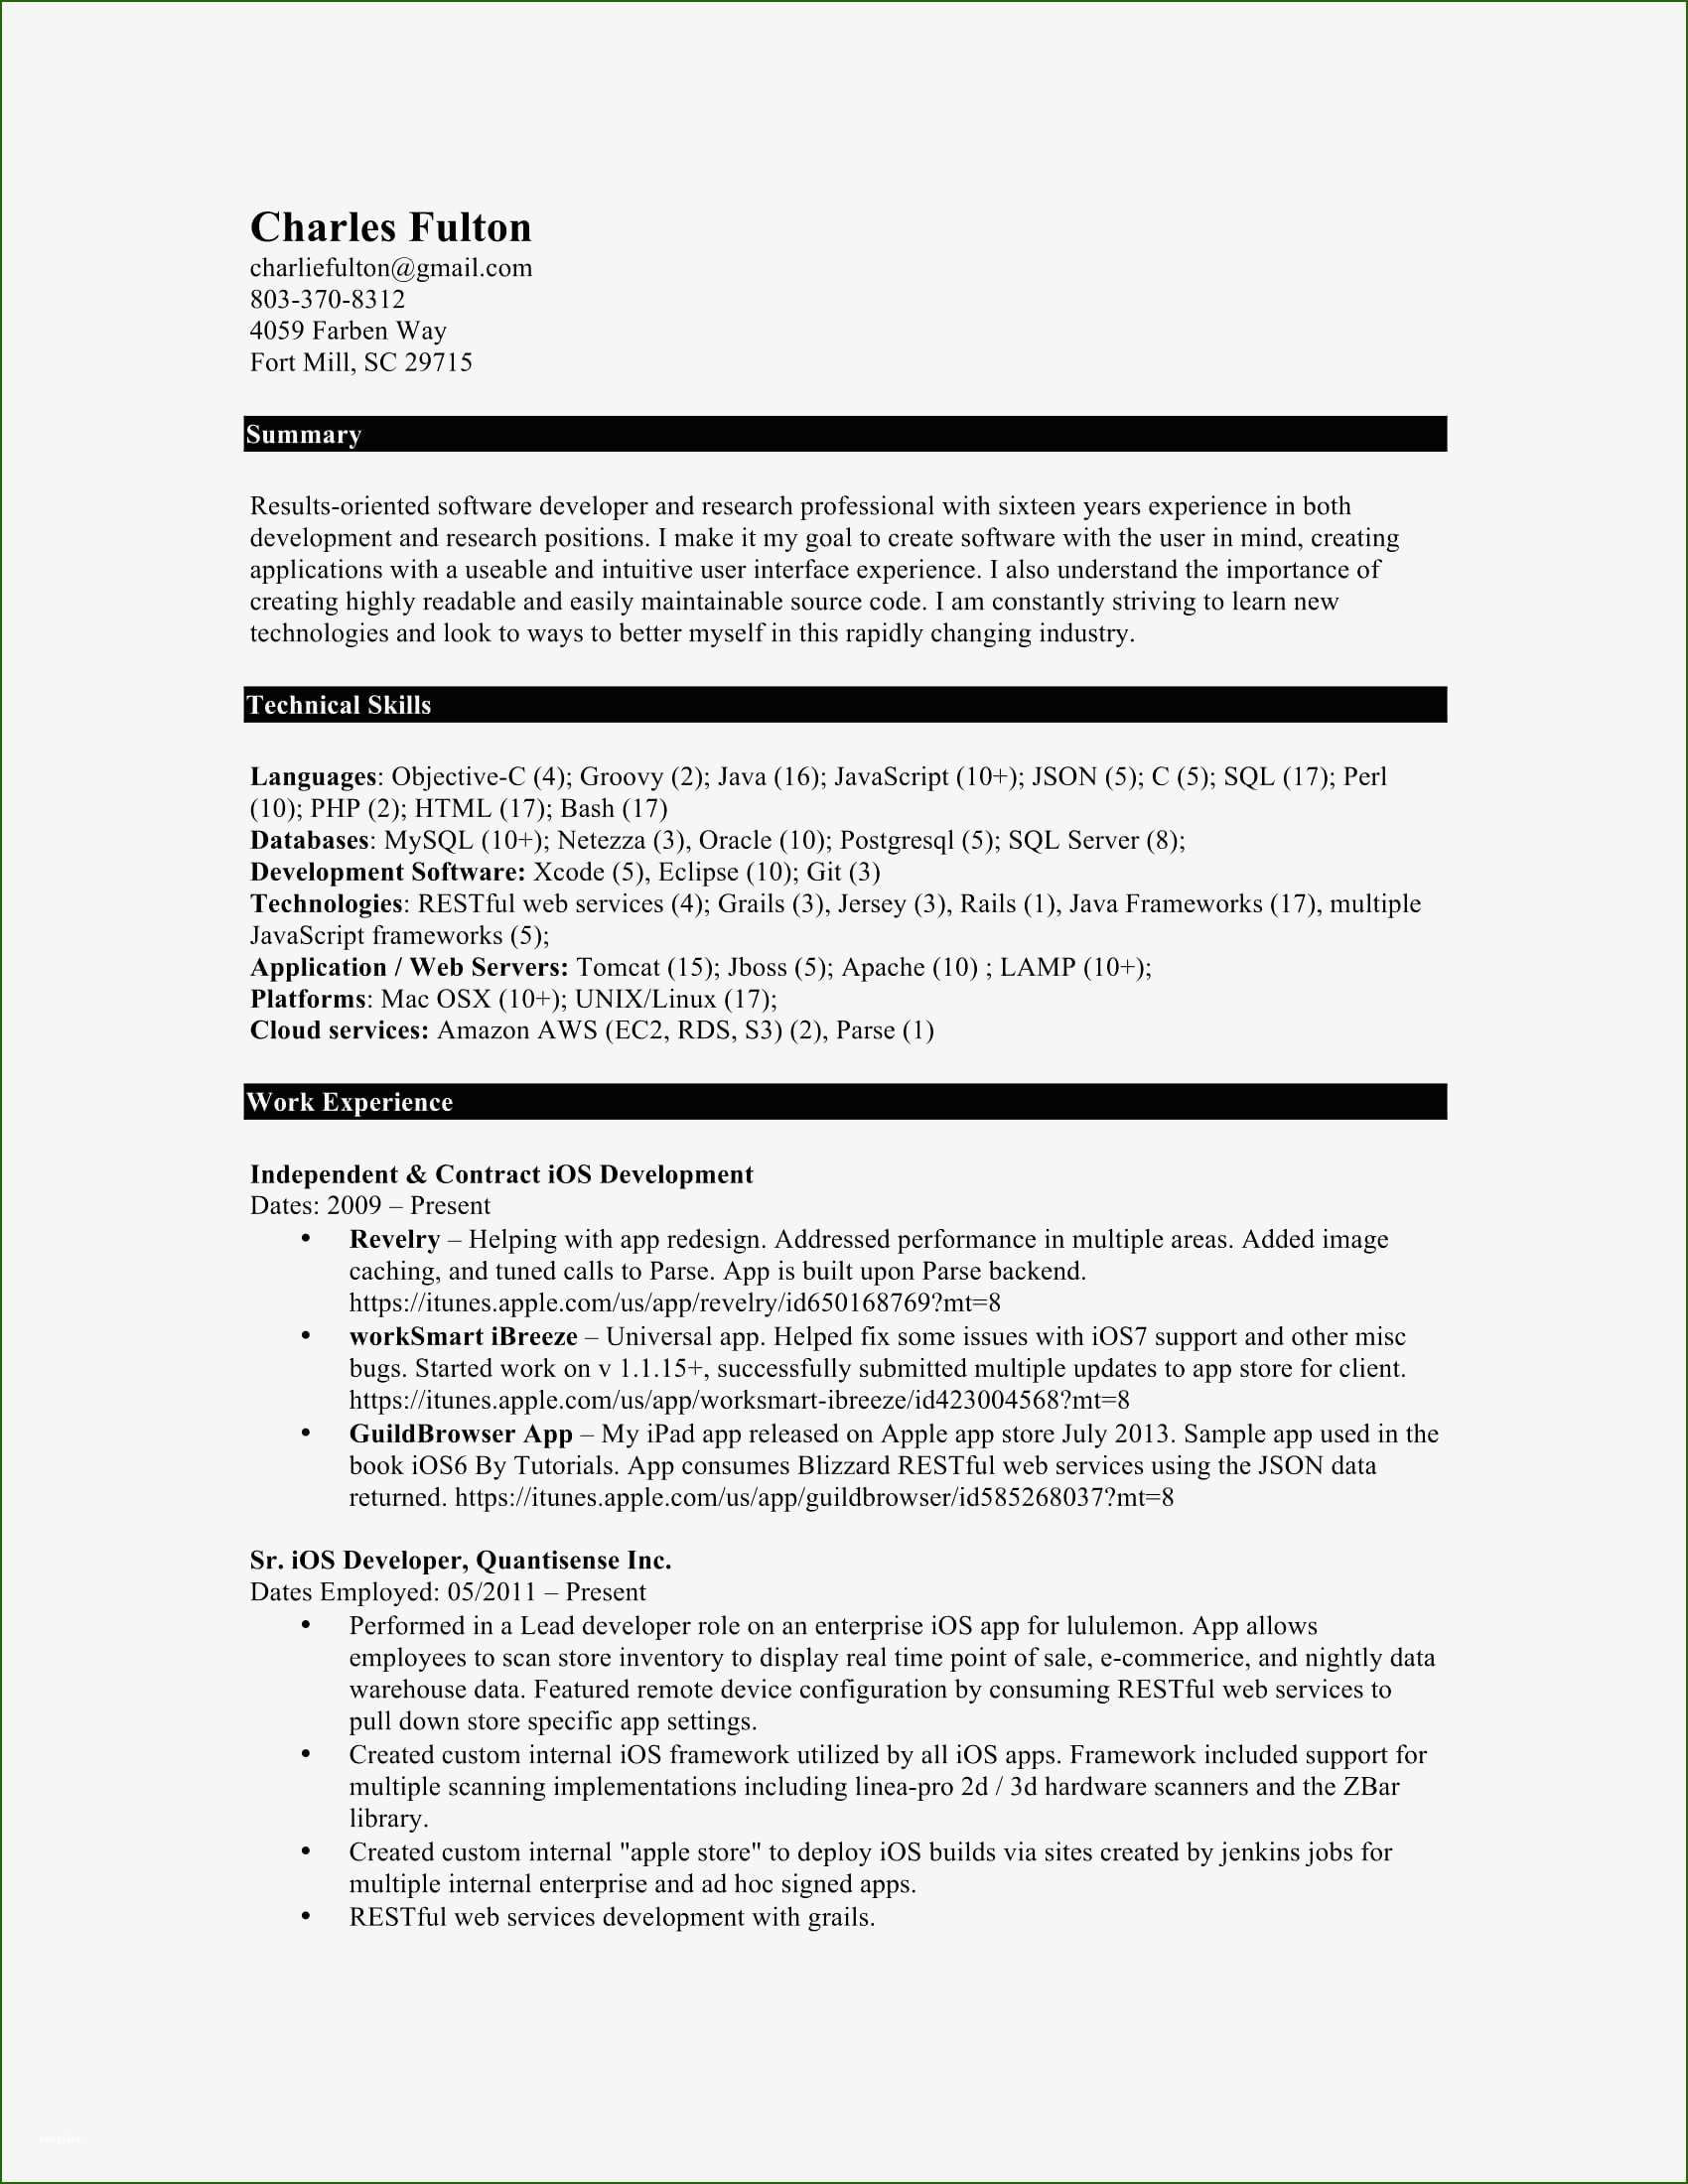 Sample Resume for 10 Years Experience software Engineer 10 Years Experience software Engineer Resume